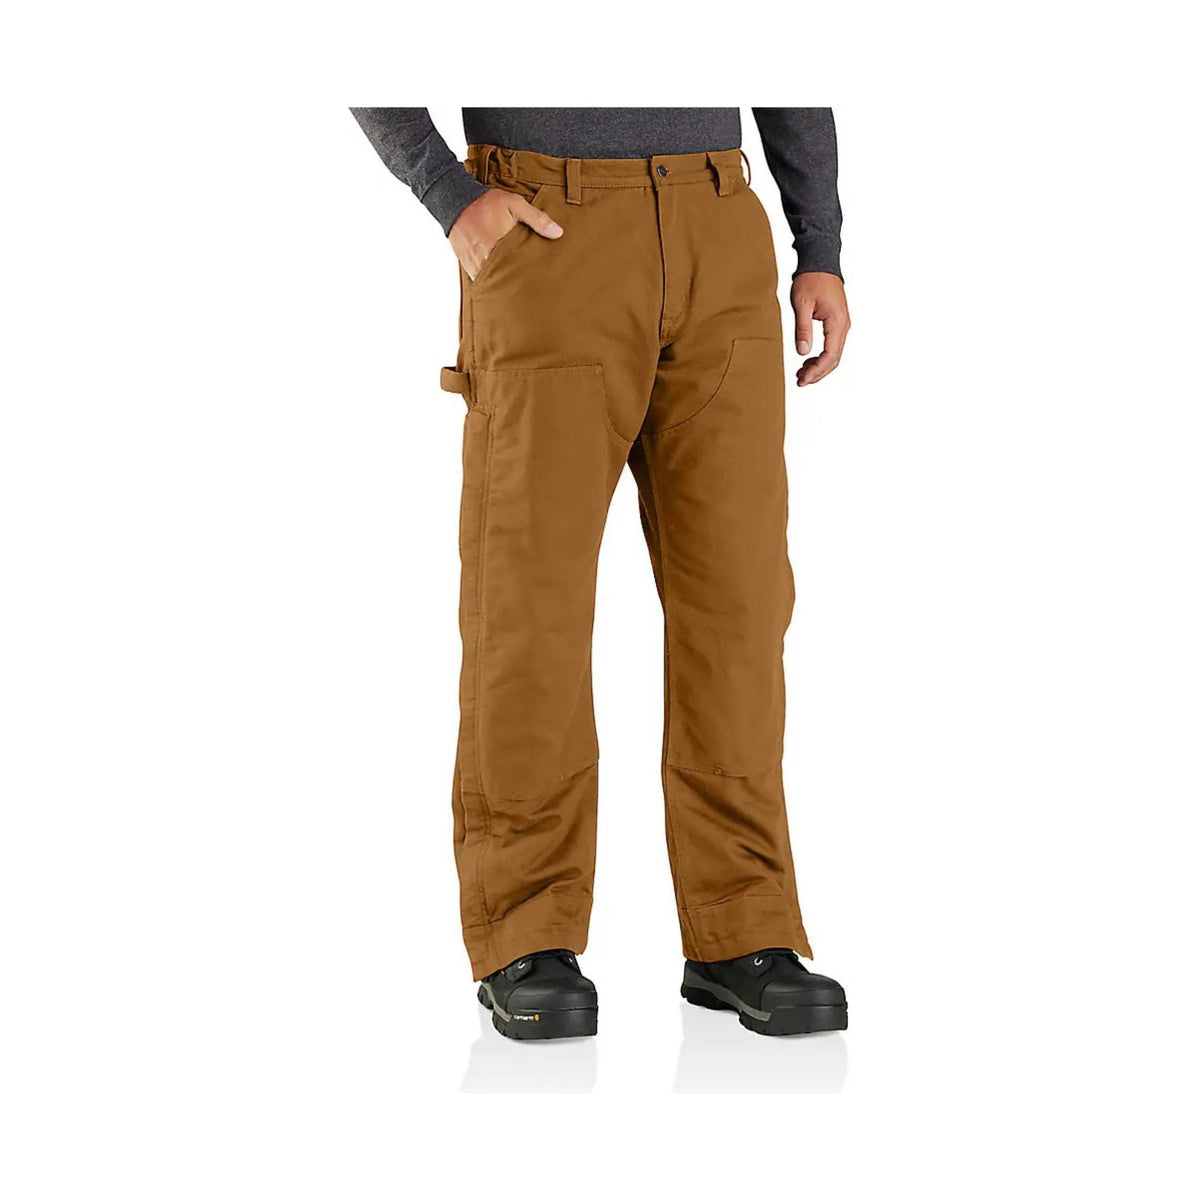 Carhartt Men's Loose Fit Washed Duck Insulated Pant - Brown 2XL / Brn / Sht